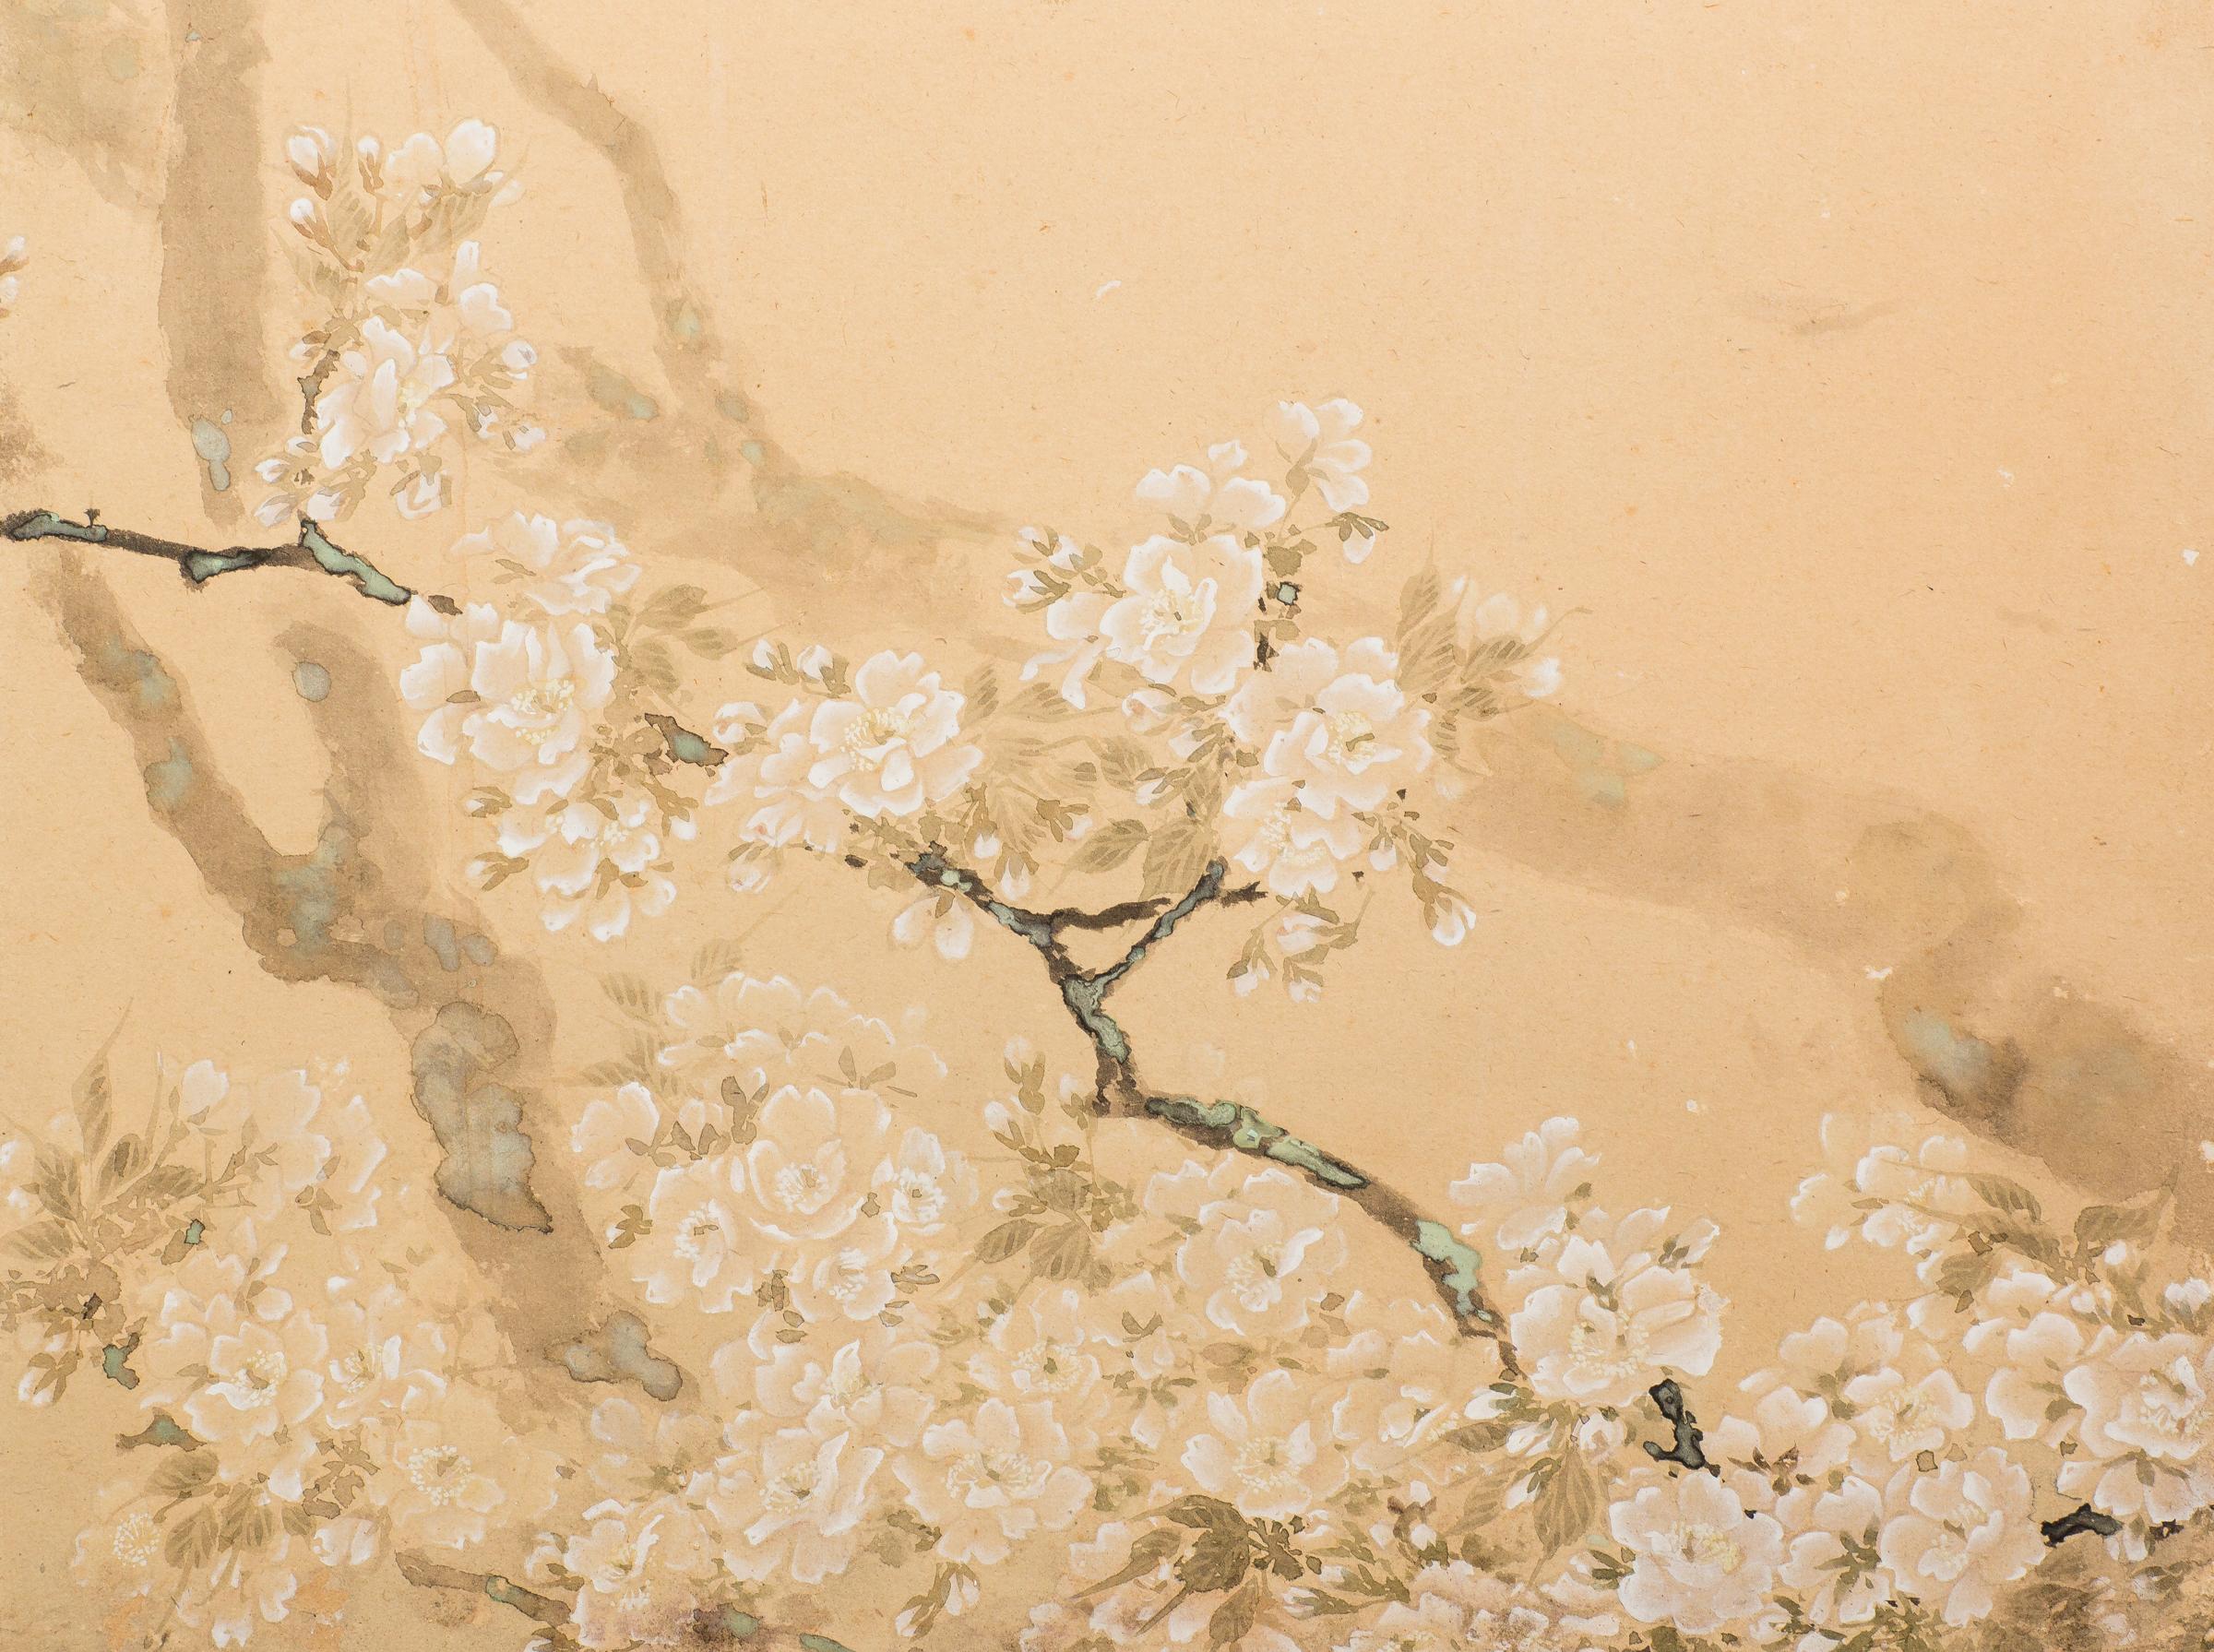 Taisho period (1912-1926) soft elegant painting of illuminated cherry blossom branches. Artist is Shoha Ito (1877-1968). She studied under Seiho Takeuchi (1864-1942), a famous Japanese painter. Mineral pigments on mulberry paper with signature and